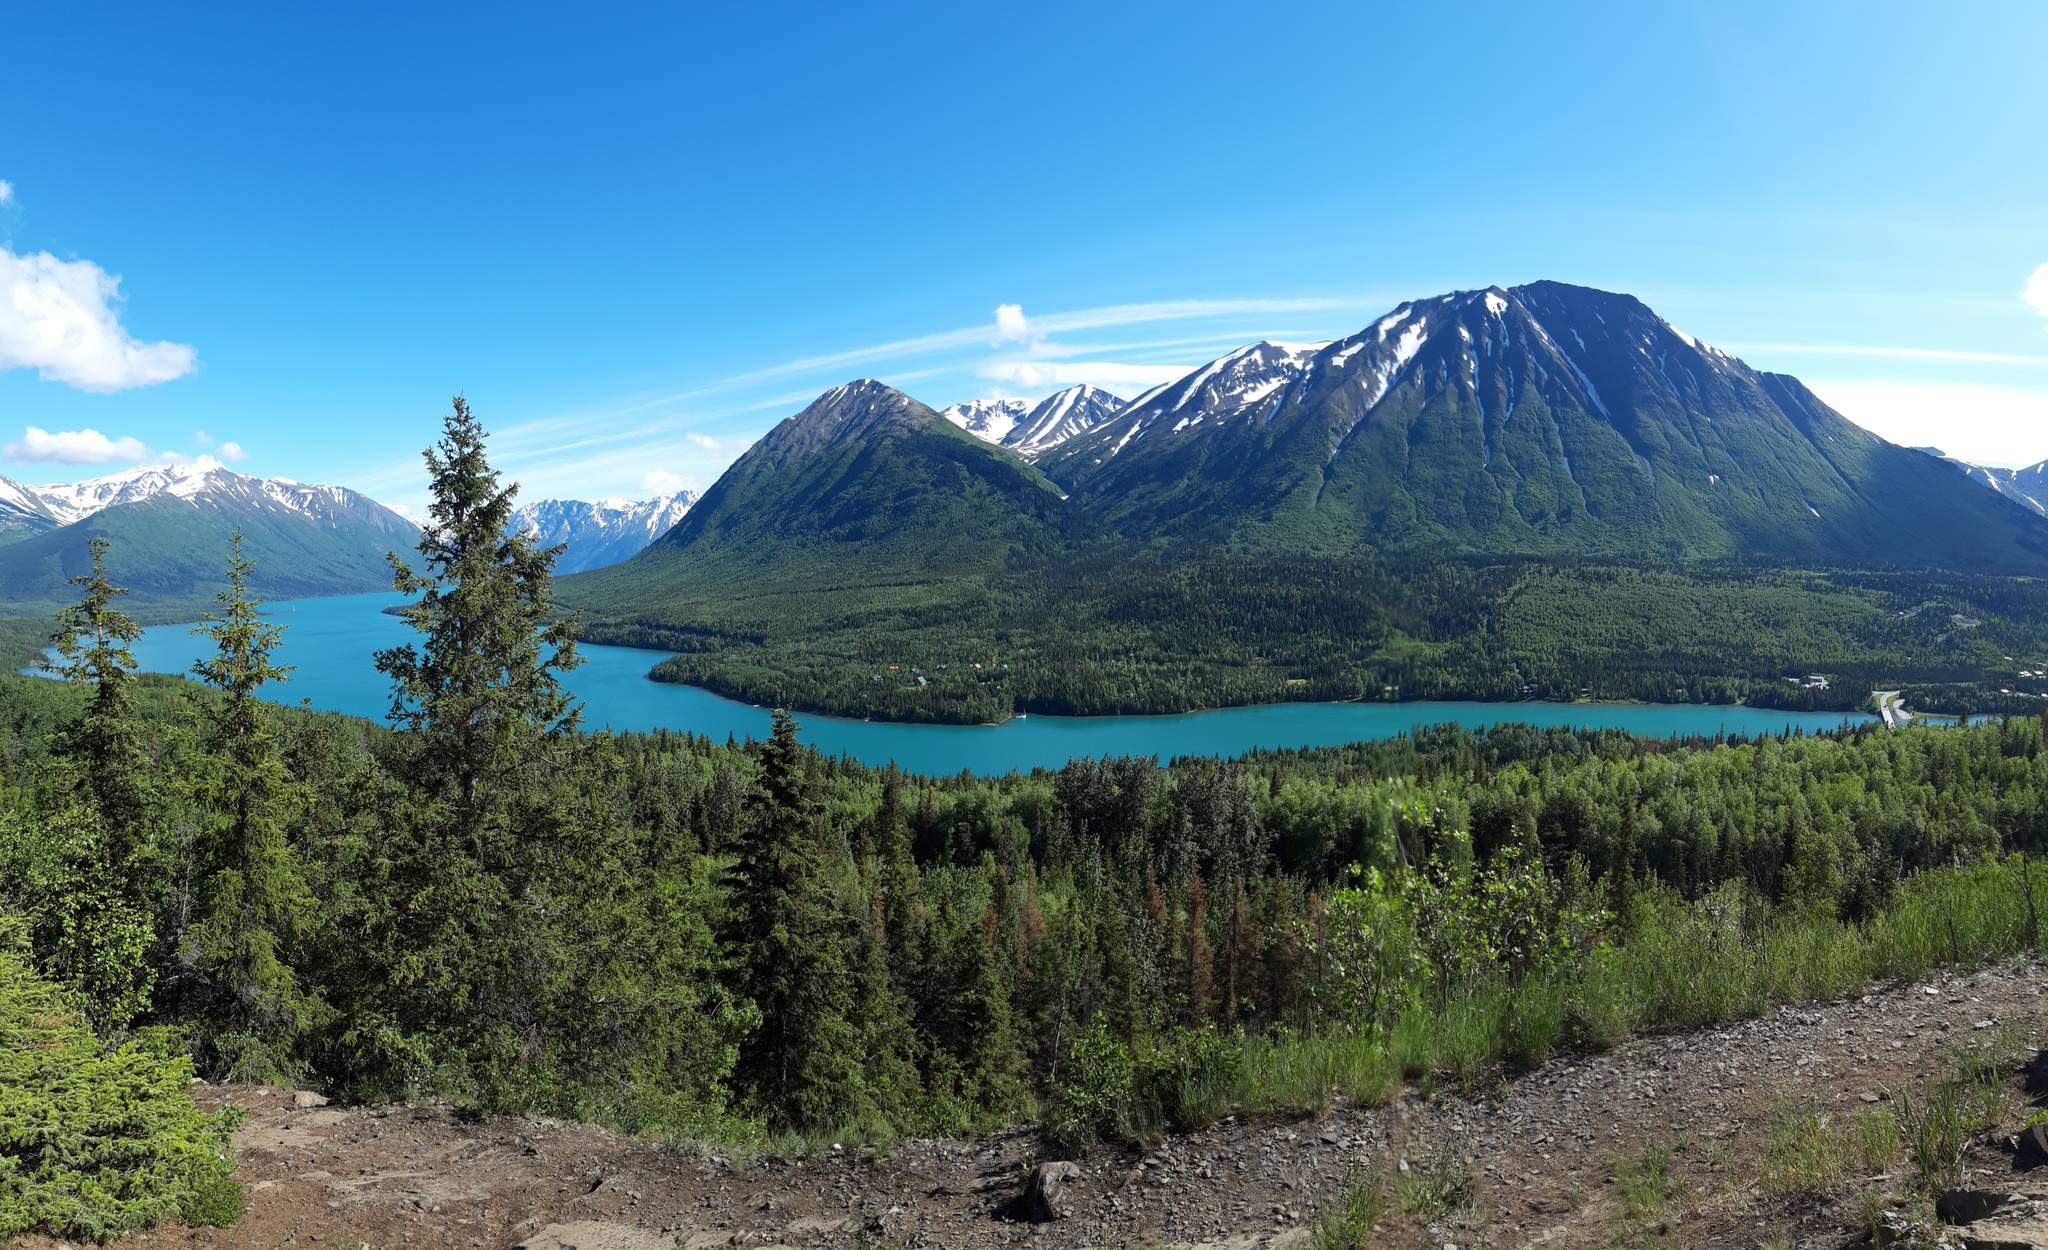 The view from Slaughter Gulch trail in Cooper Landing, Alaska, on June 20, 2020. (Photo by Brian Mazurek/Peninsula Clarion)